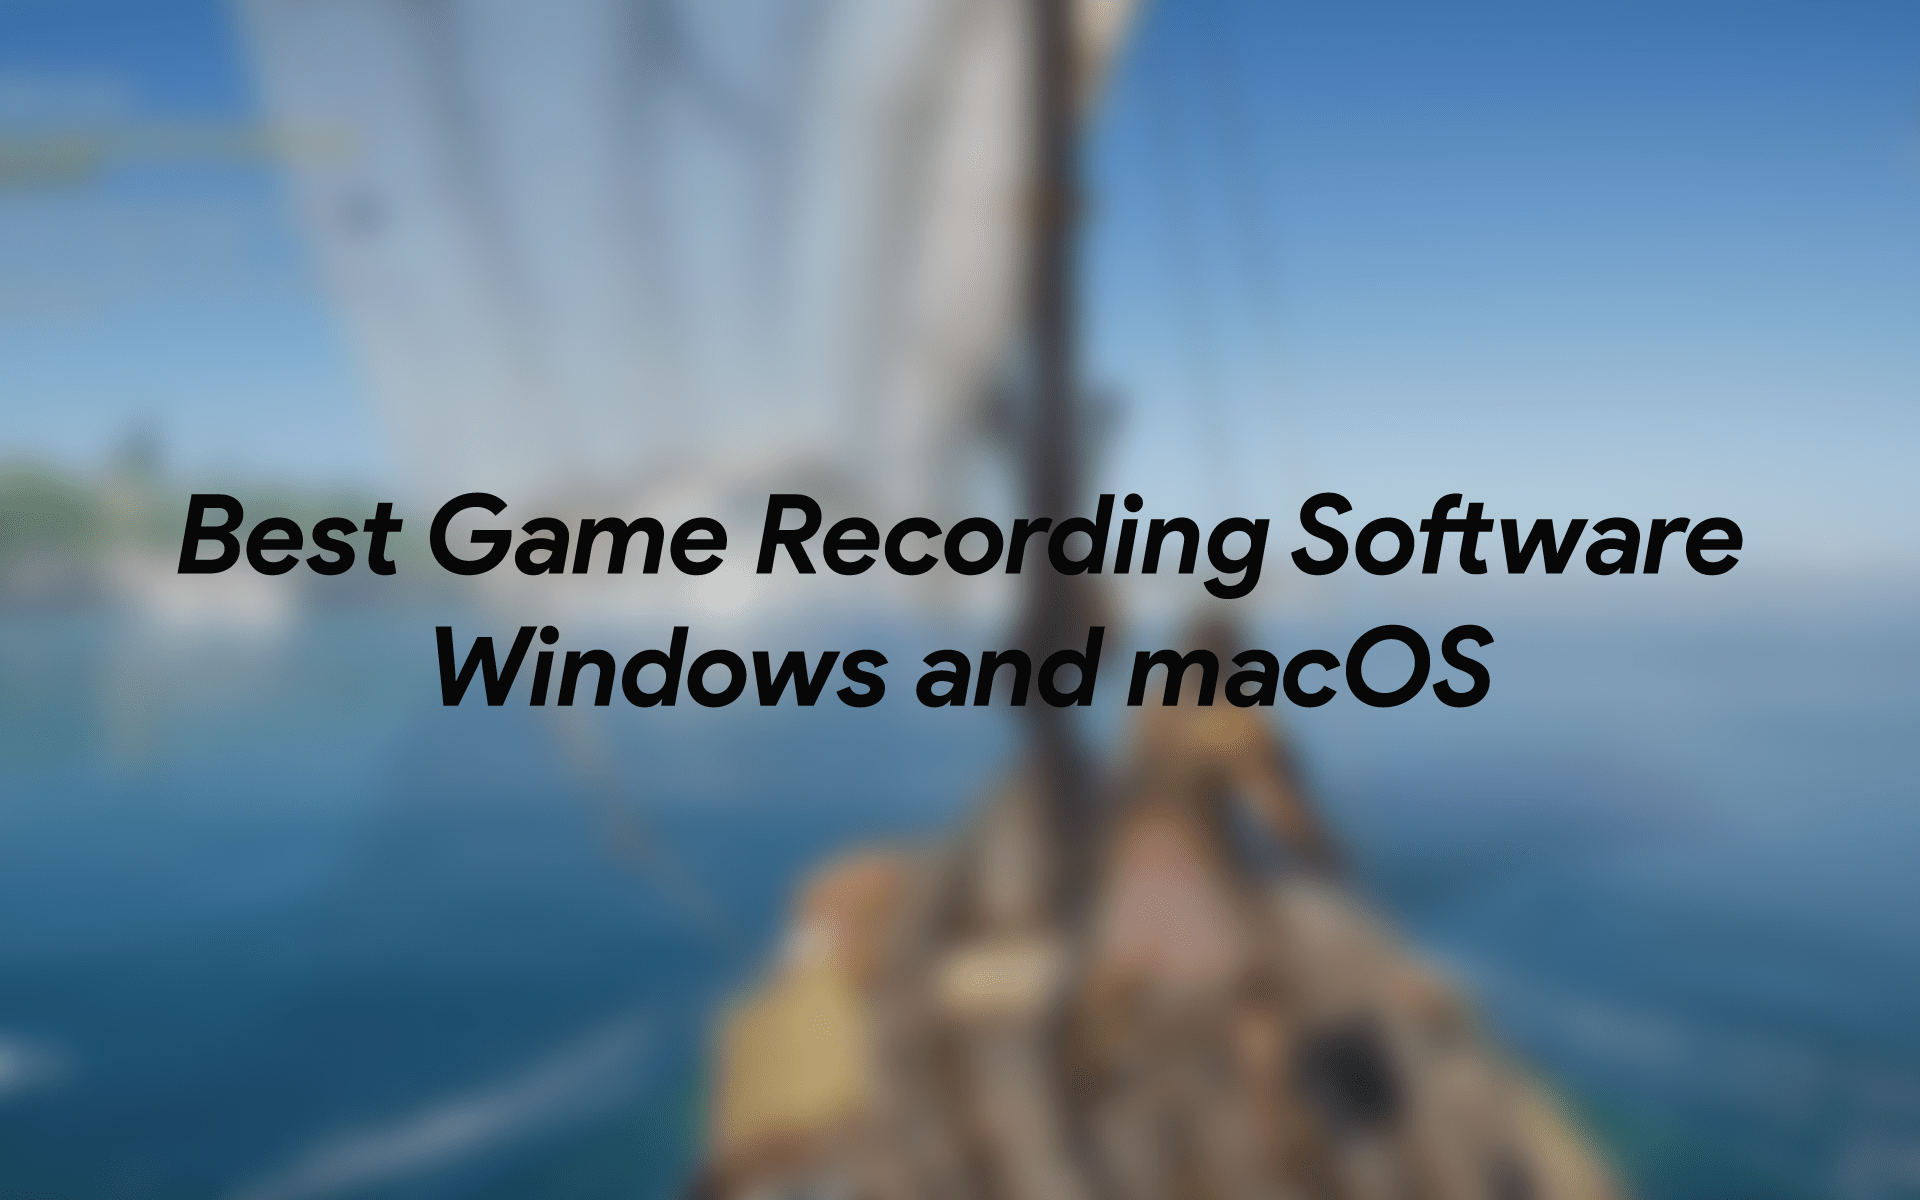 Best Game Recording Software Windows PC and macOS